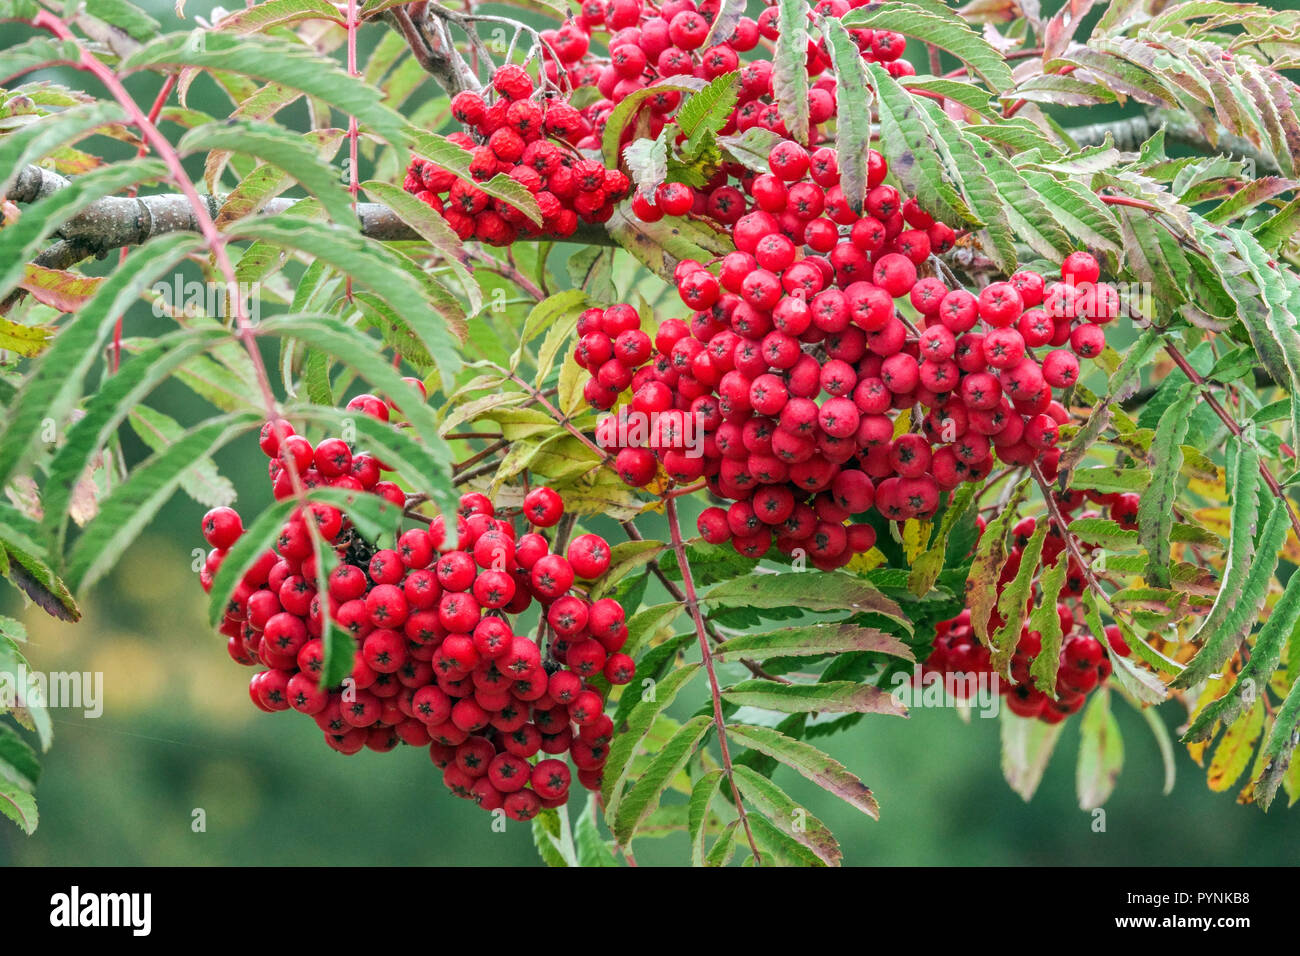 Rowan, Mountain Ash, Sorbus 'Chinese Lace' Tree, autumn red berries branches with berries Stock Photo